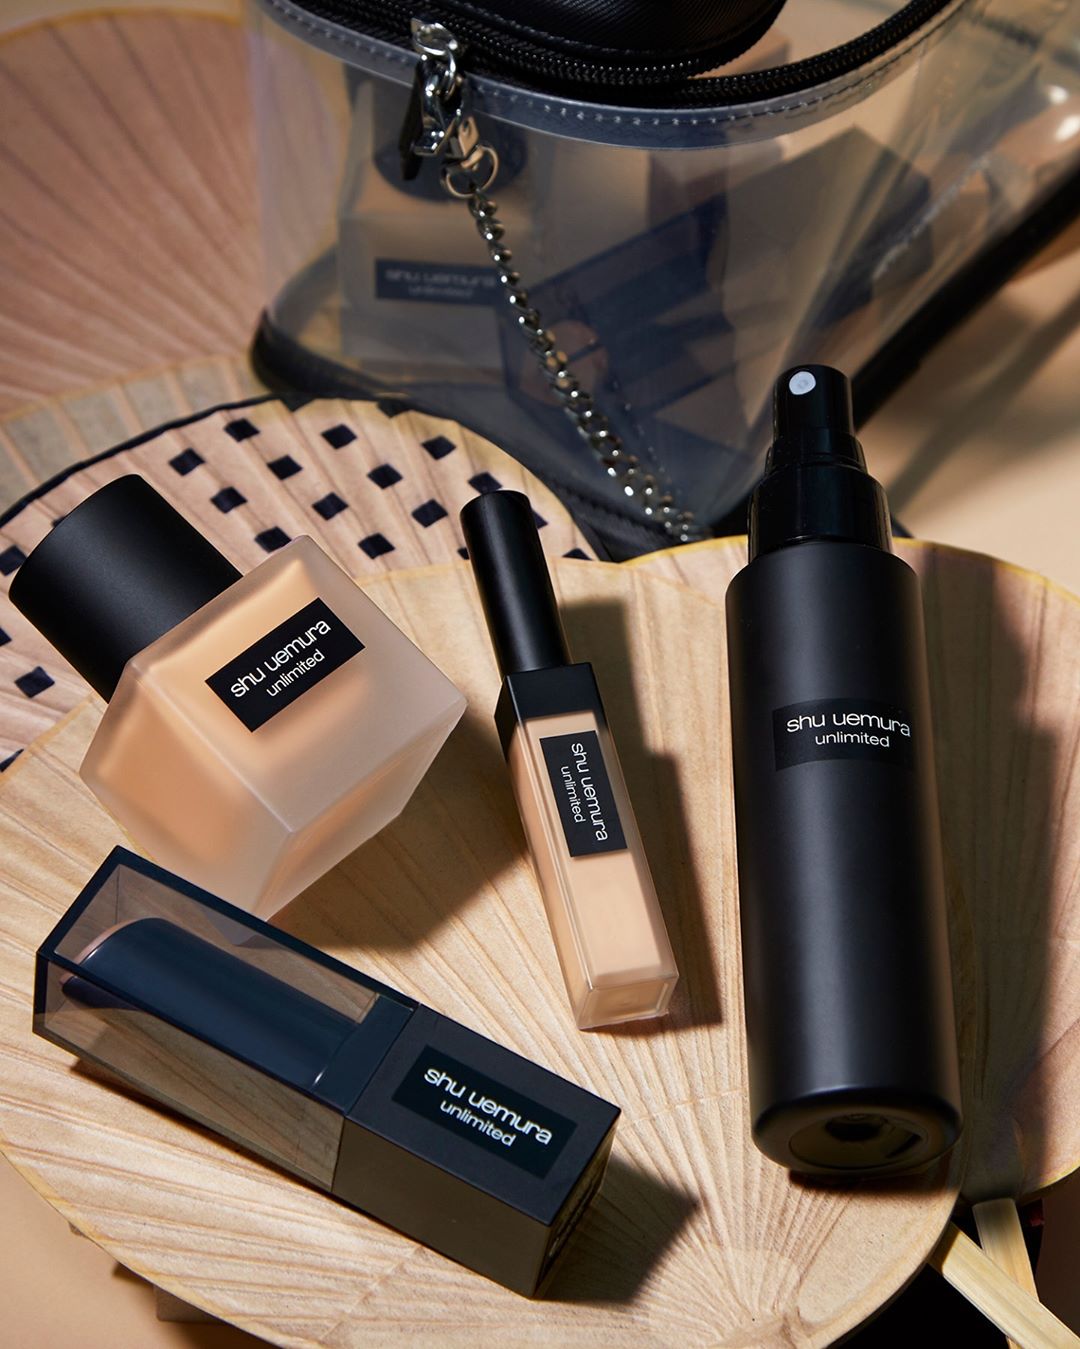 shu uemura - what’s your favorite product from the unlimited family? 😍 #shuuemura #unlimitedfoundation